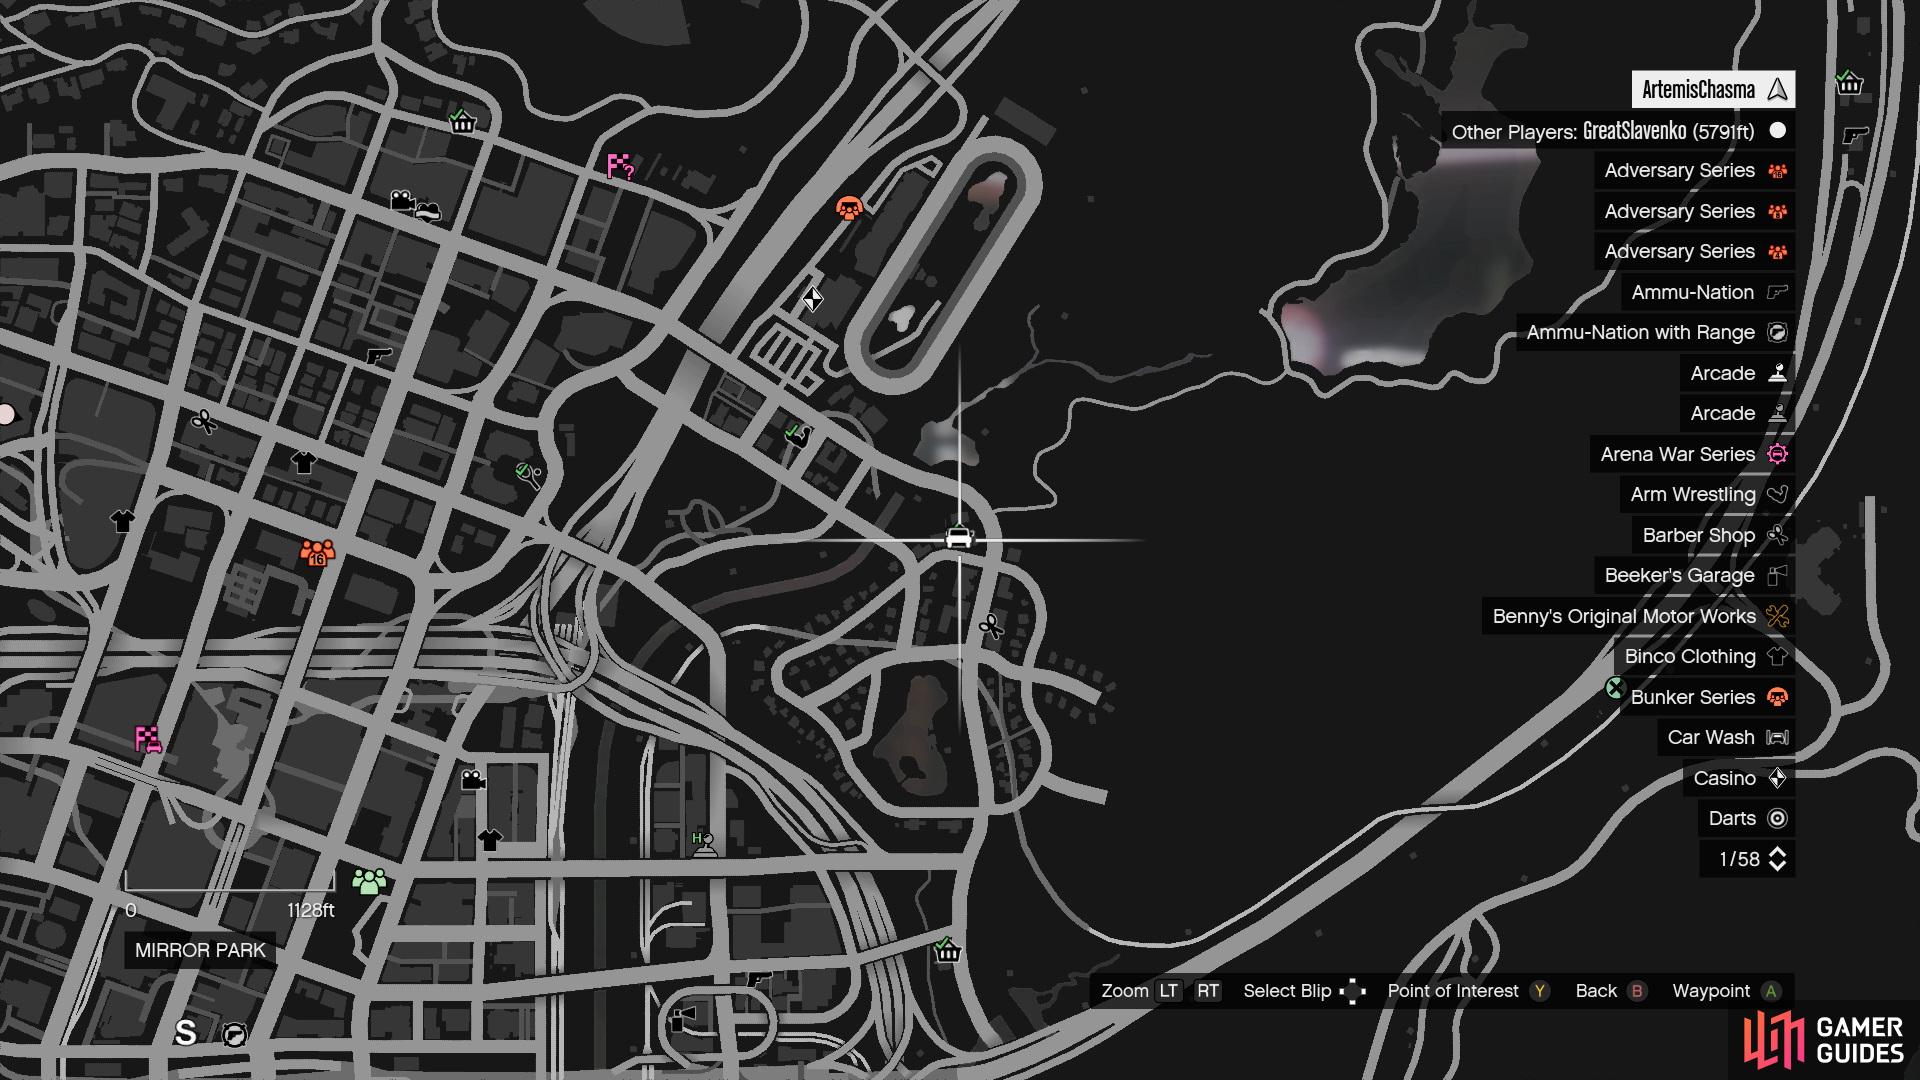 Head to this location on the map